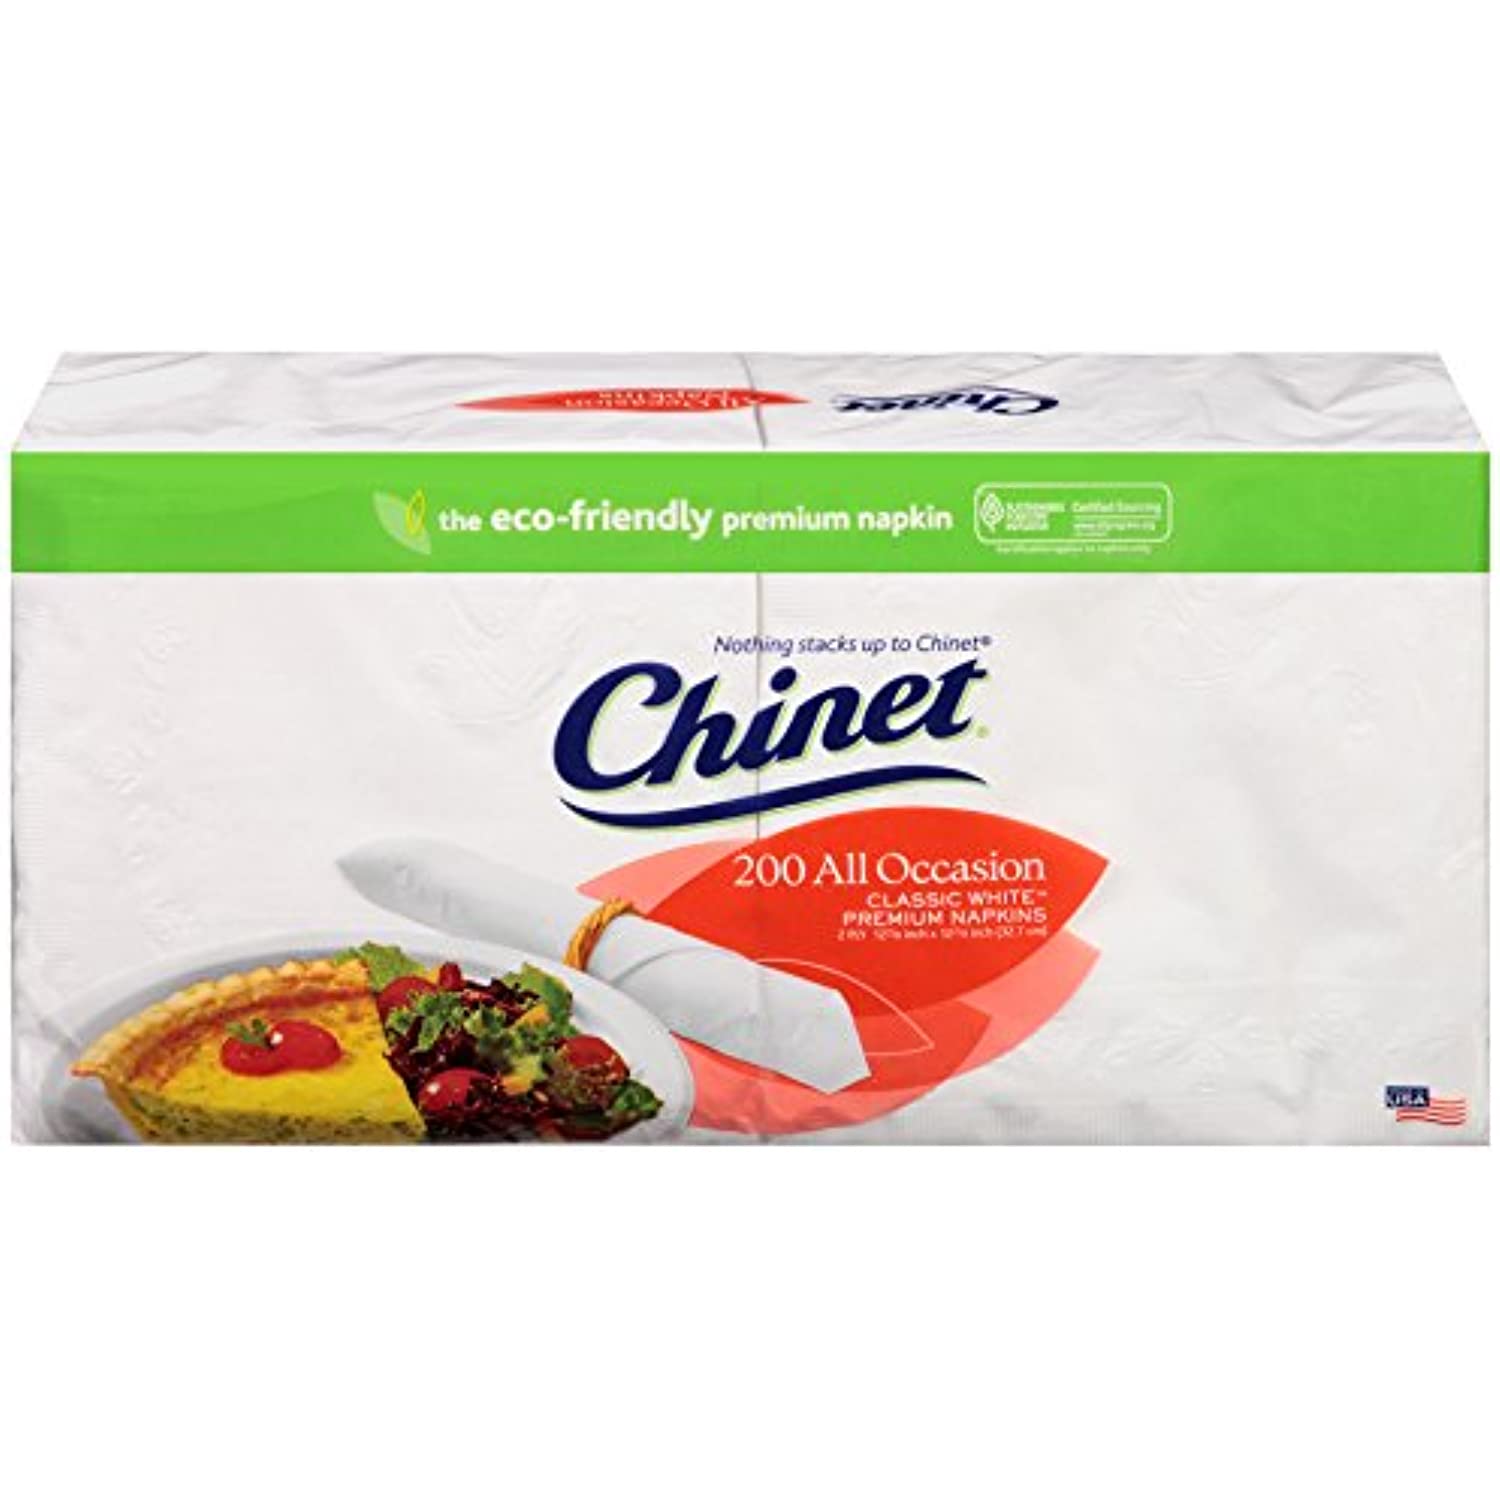 Chinet Napkin All Occasion 200X (Each)